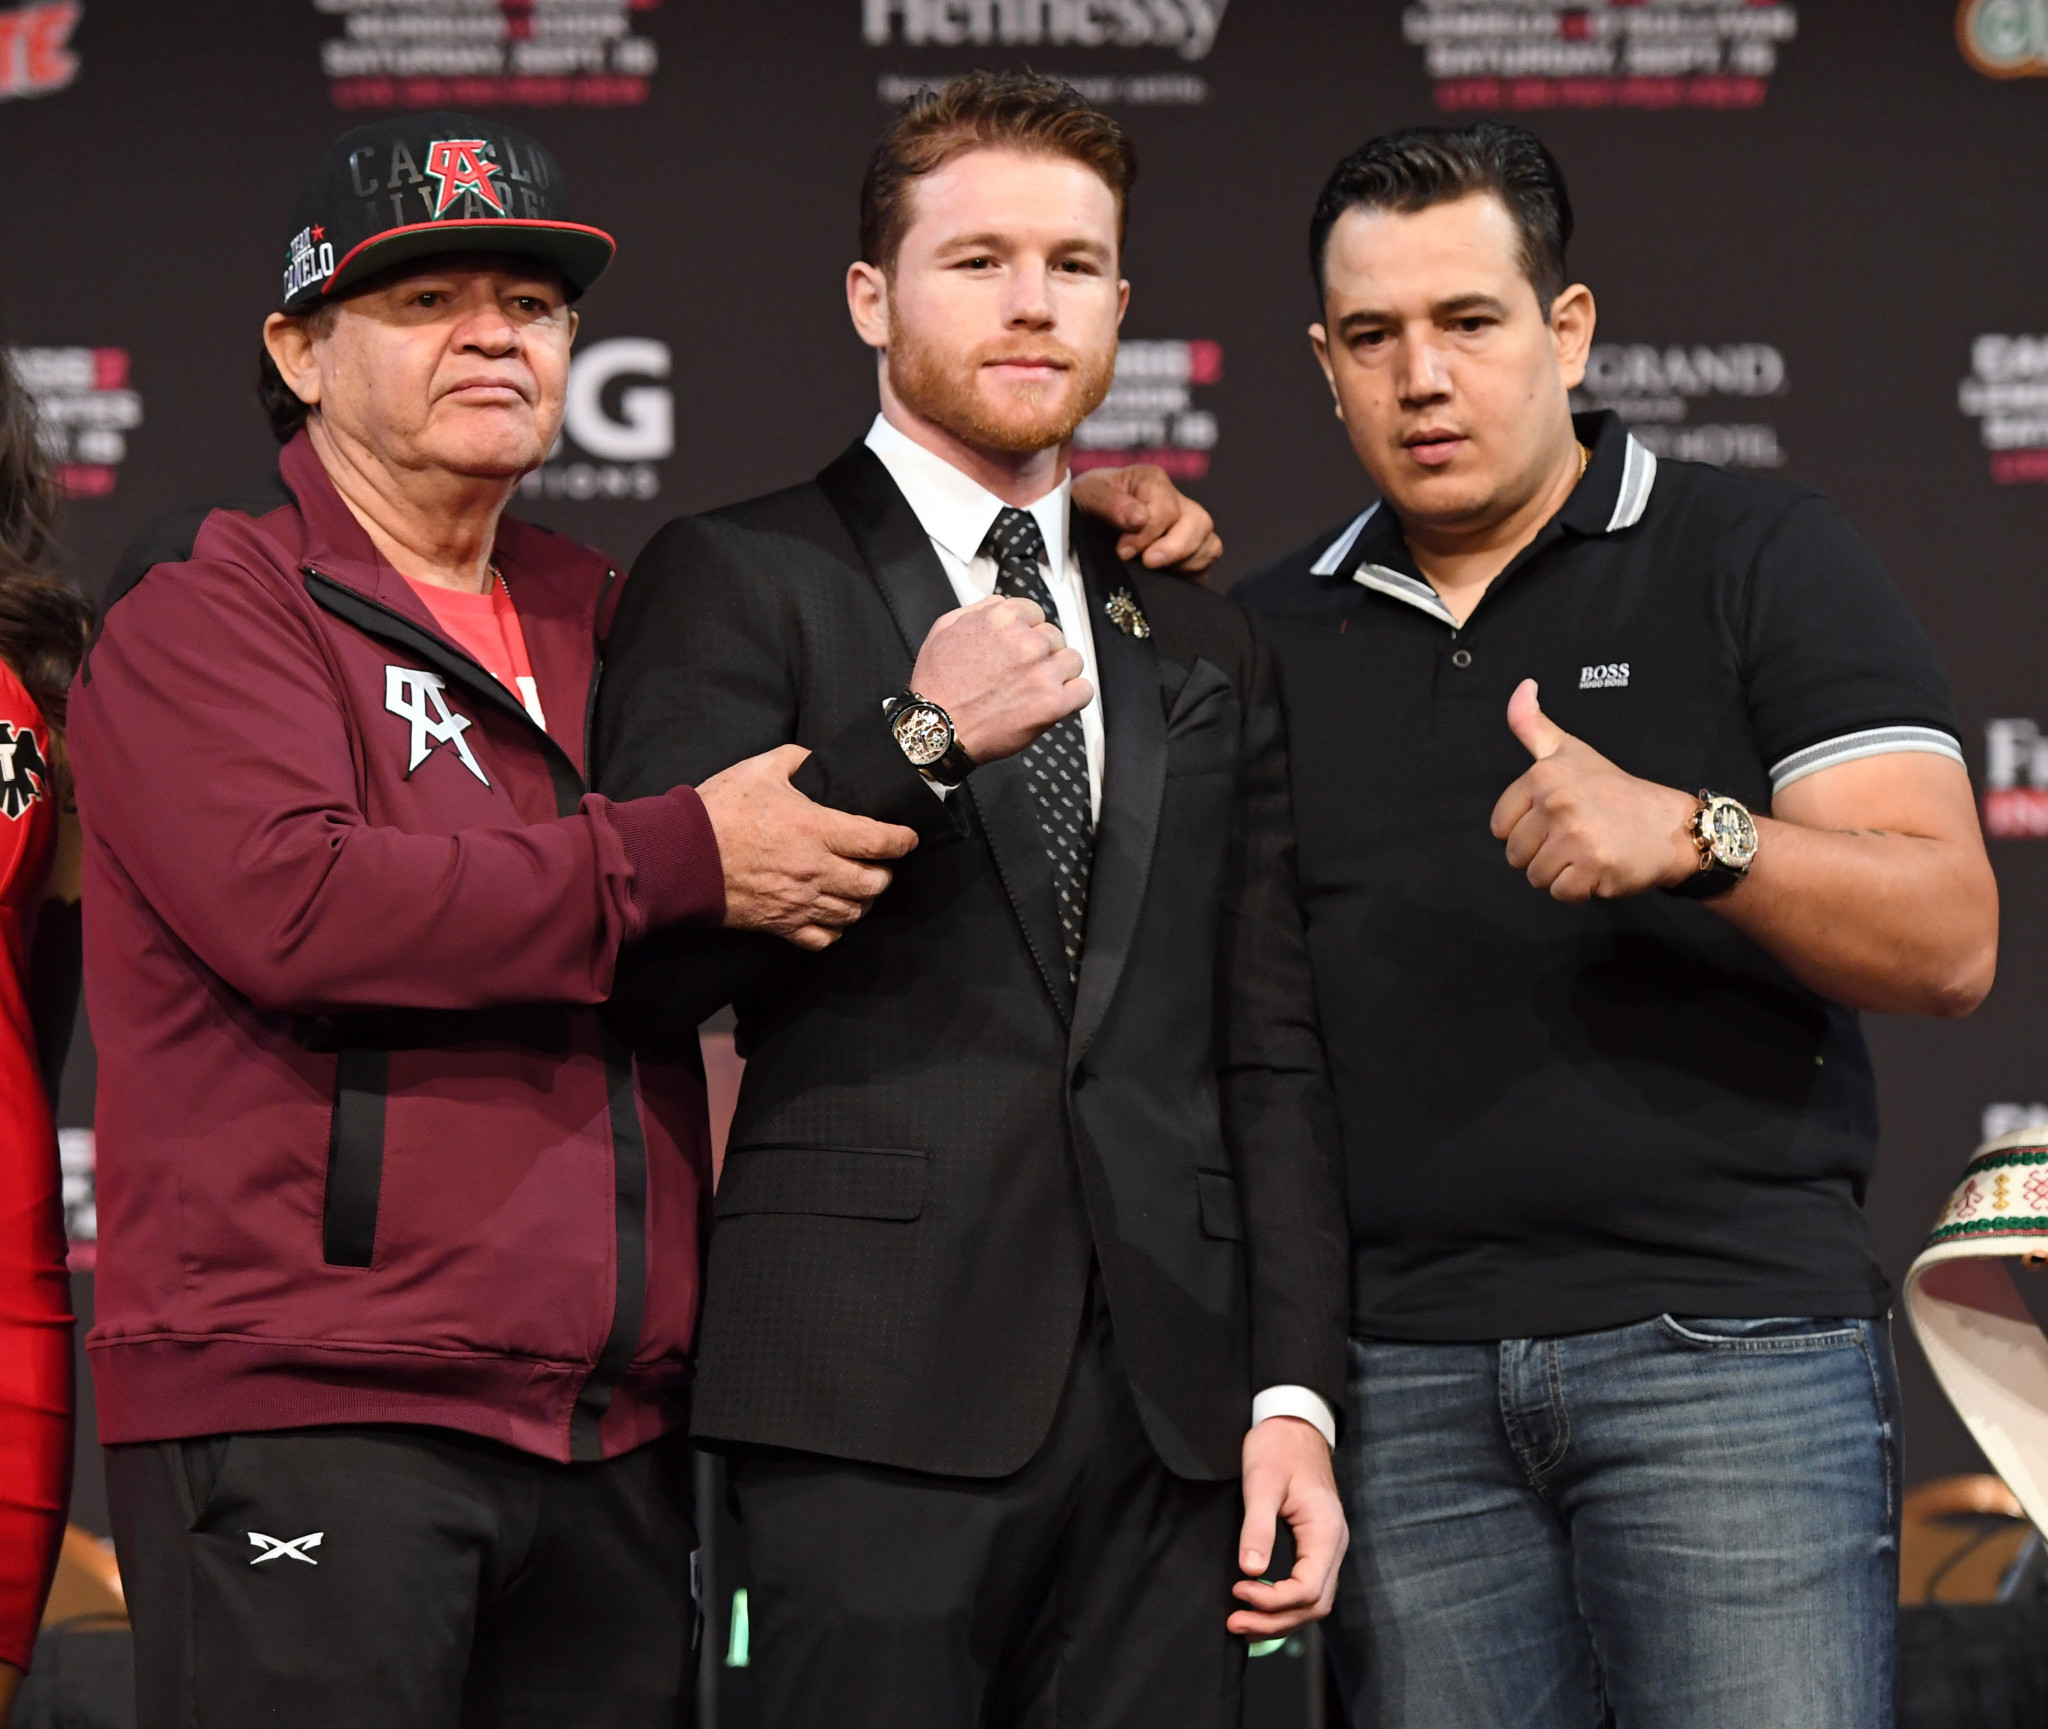 Saul Alvarez has insisted his positive drugs test was as a result of contaminated meat ©Getty Images